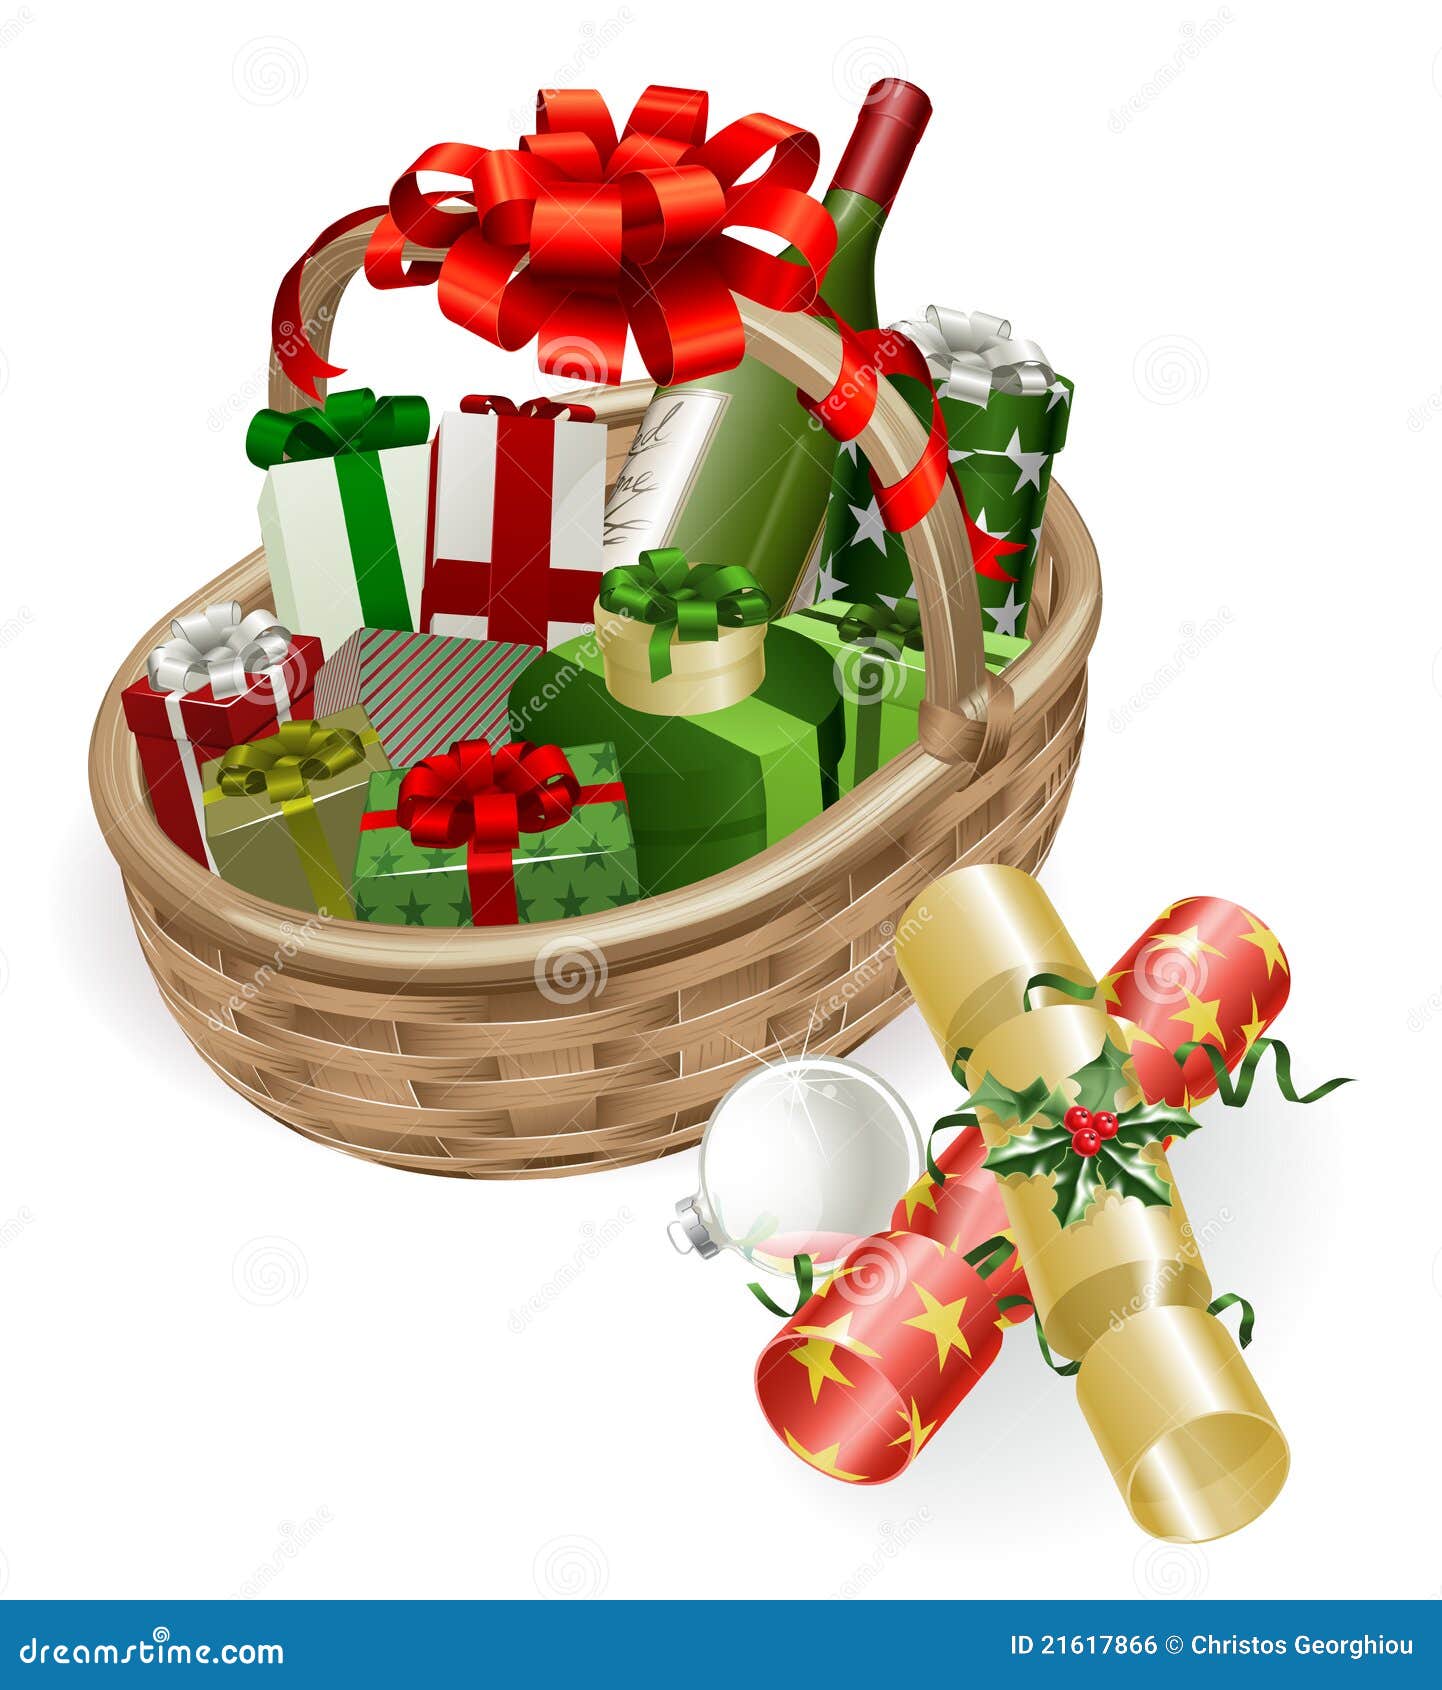 clipart gift baskets - photo #20